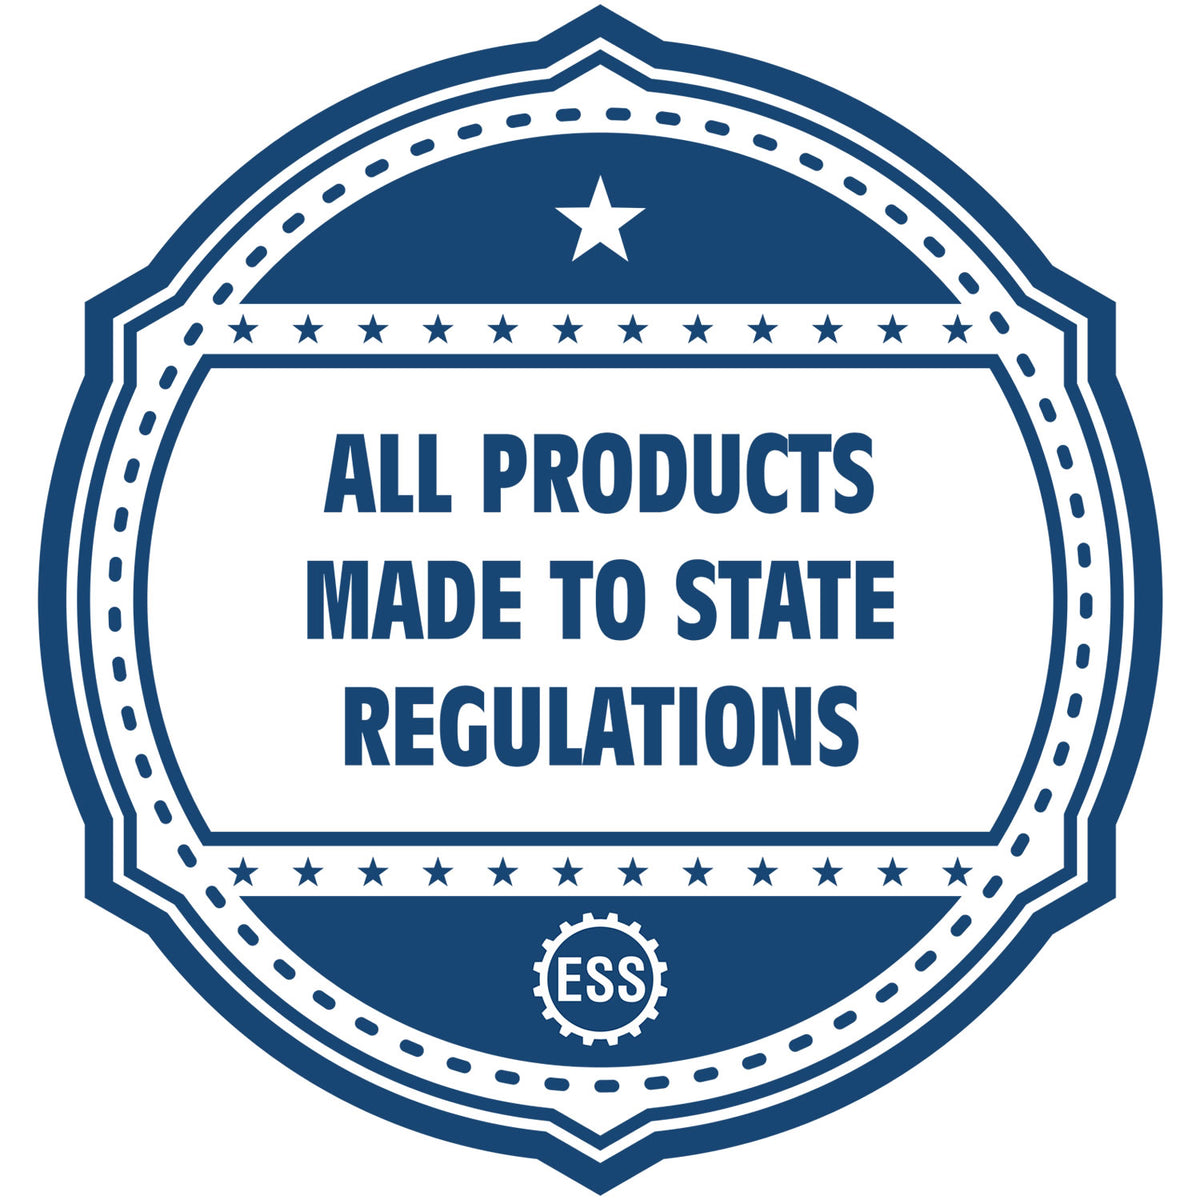 An icon or badge element for the Soft Pocket Virginia Landscape Architect Embosser showing that this product is made in compliance with state regulations.